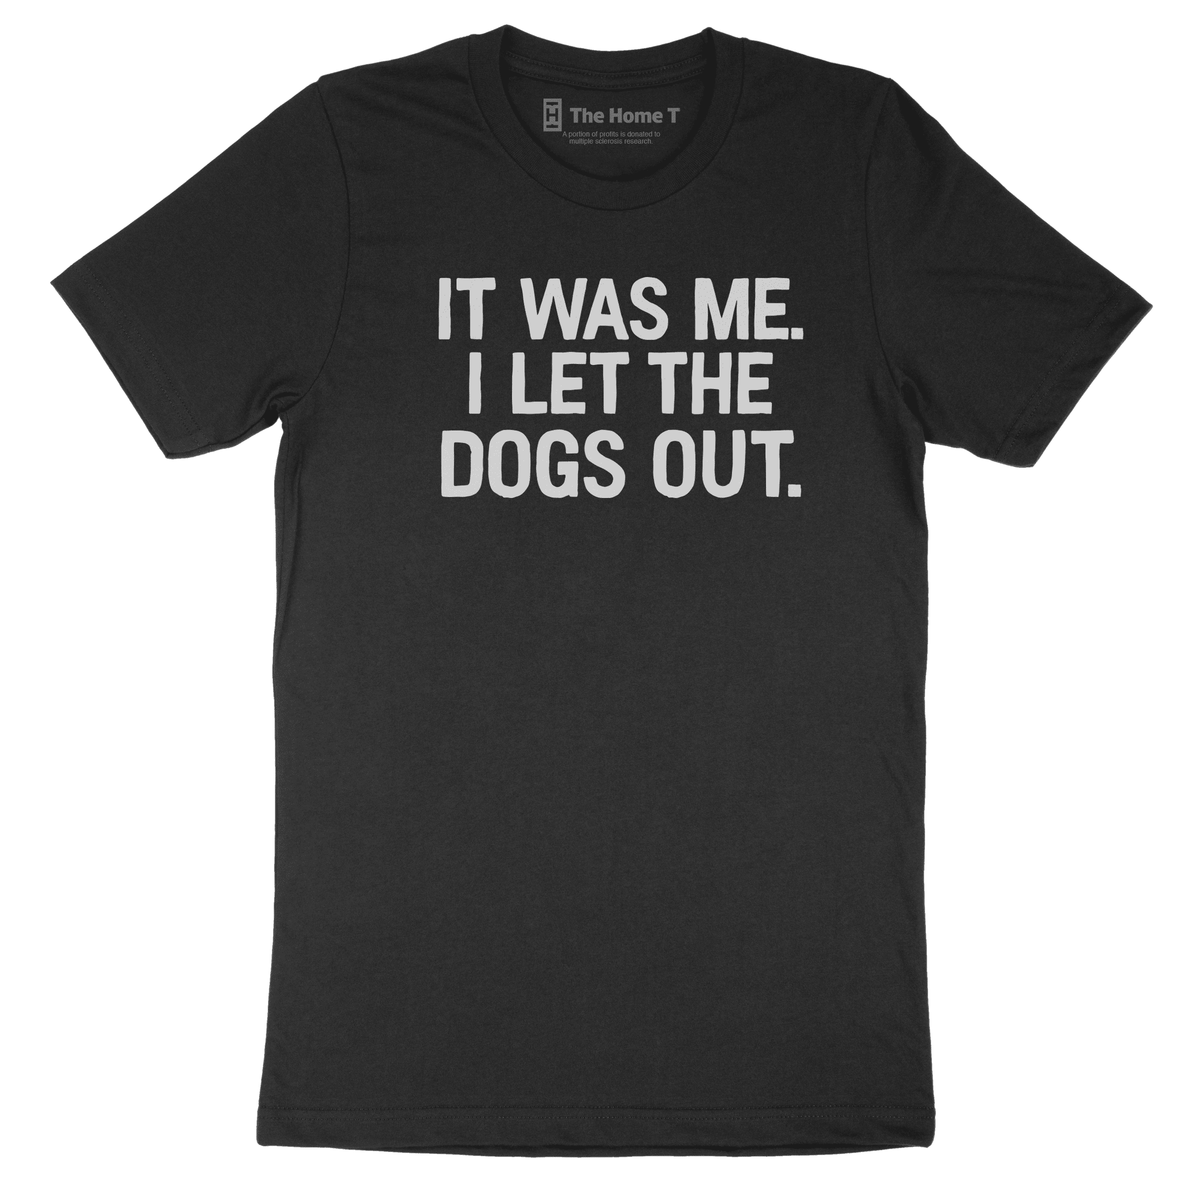 It Was Me. I Let the Dogs Out.